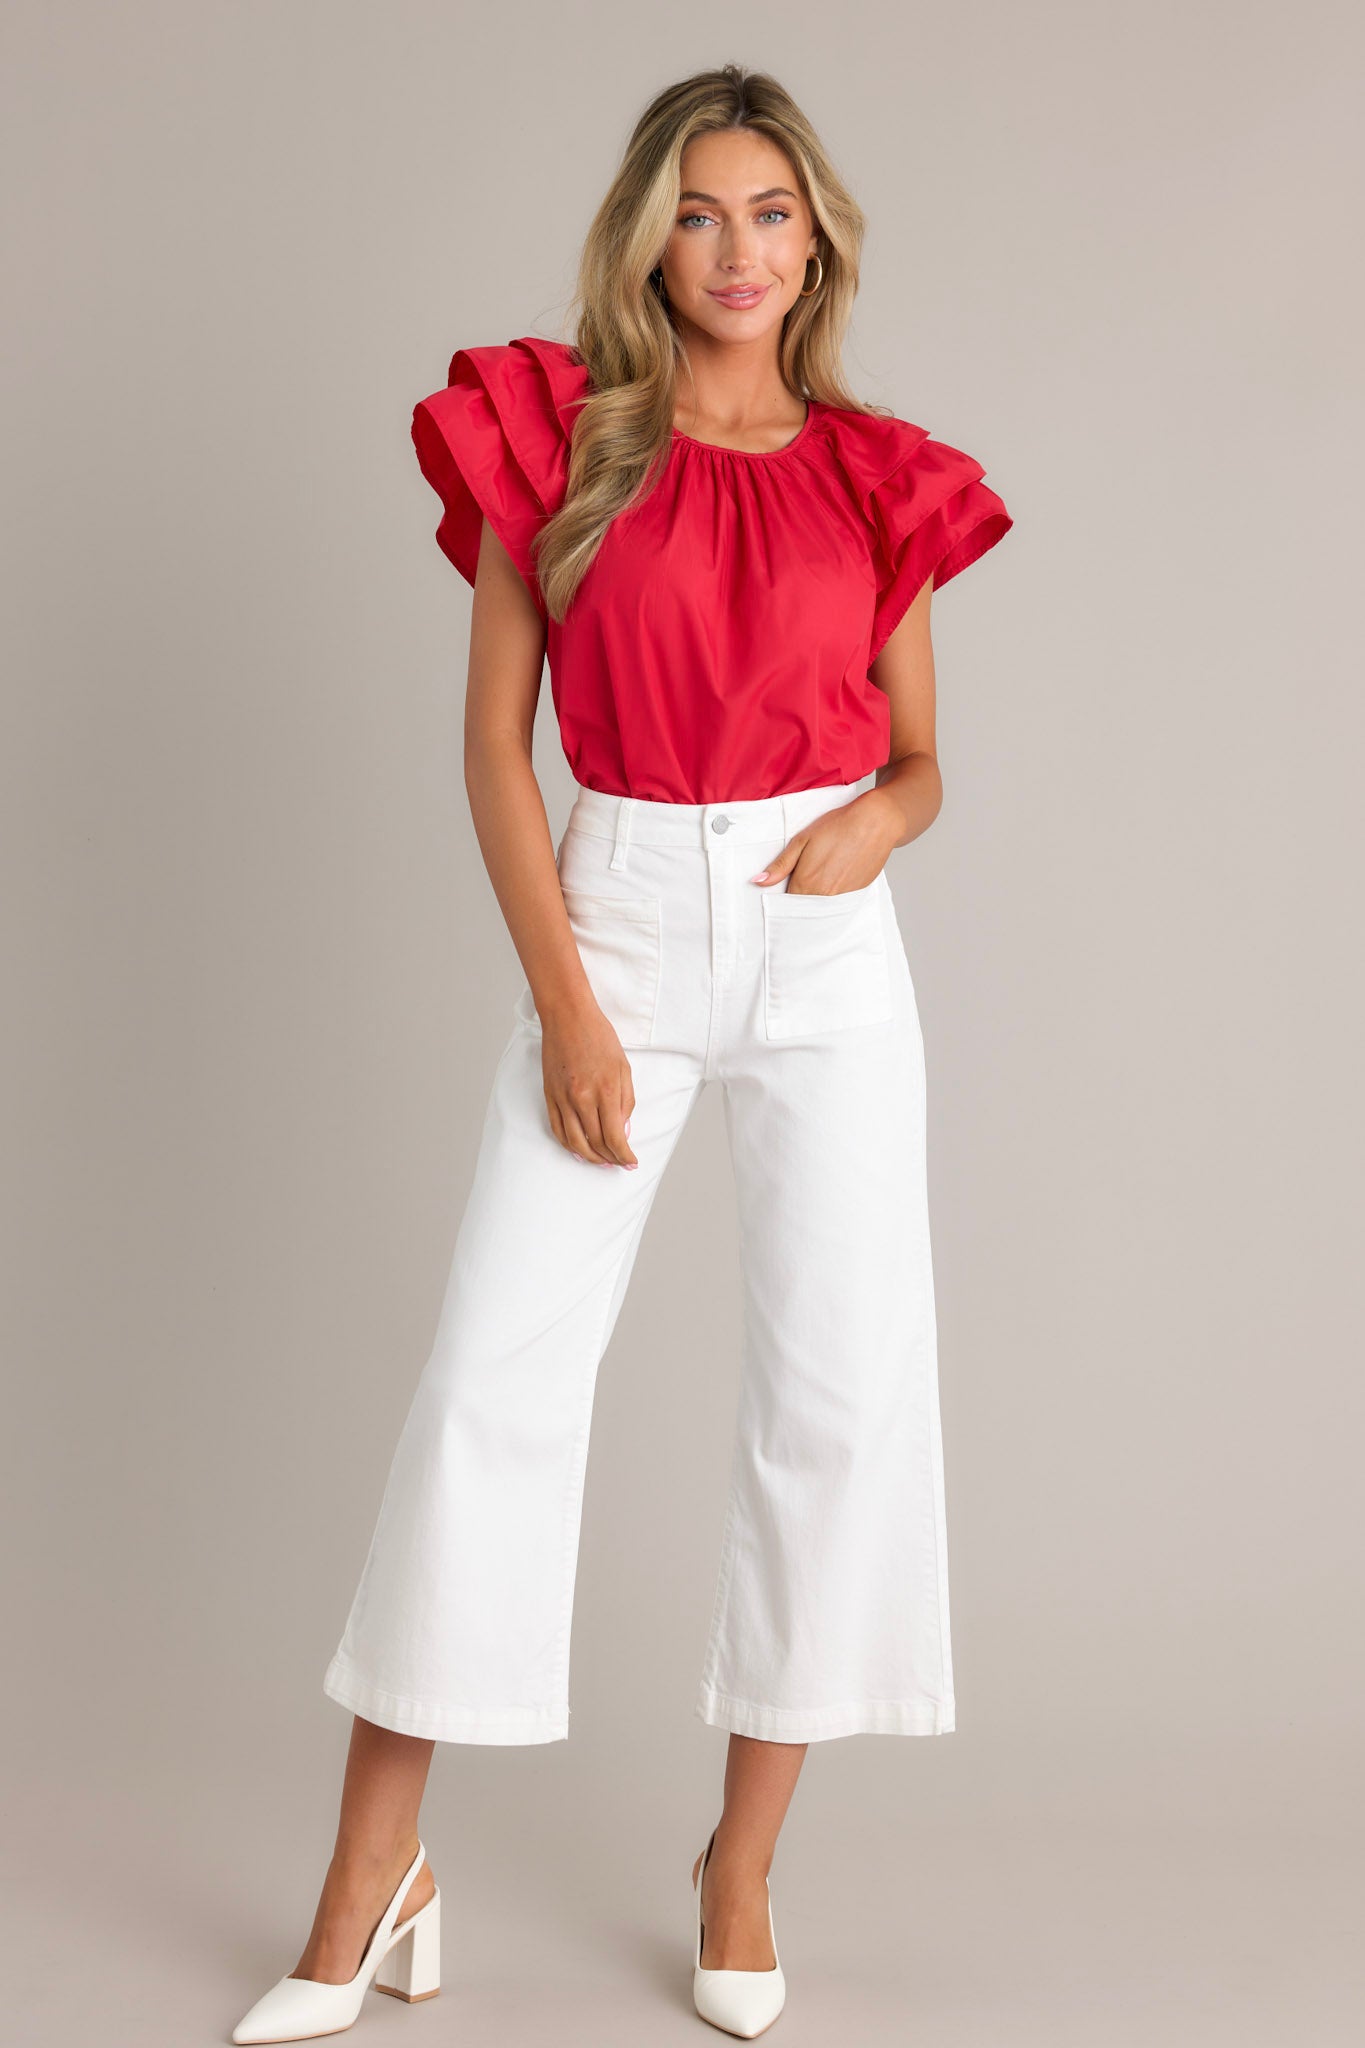 Full length view of a red top with a rounded neckline, gathering at the neckline, a keyhole with a button closure, and ruffled short sleeves